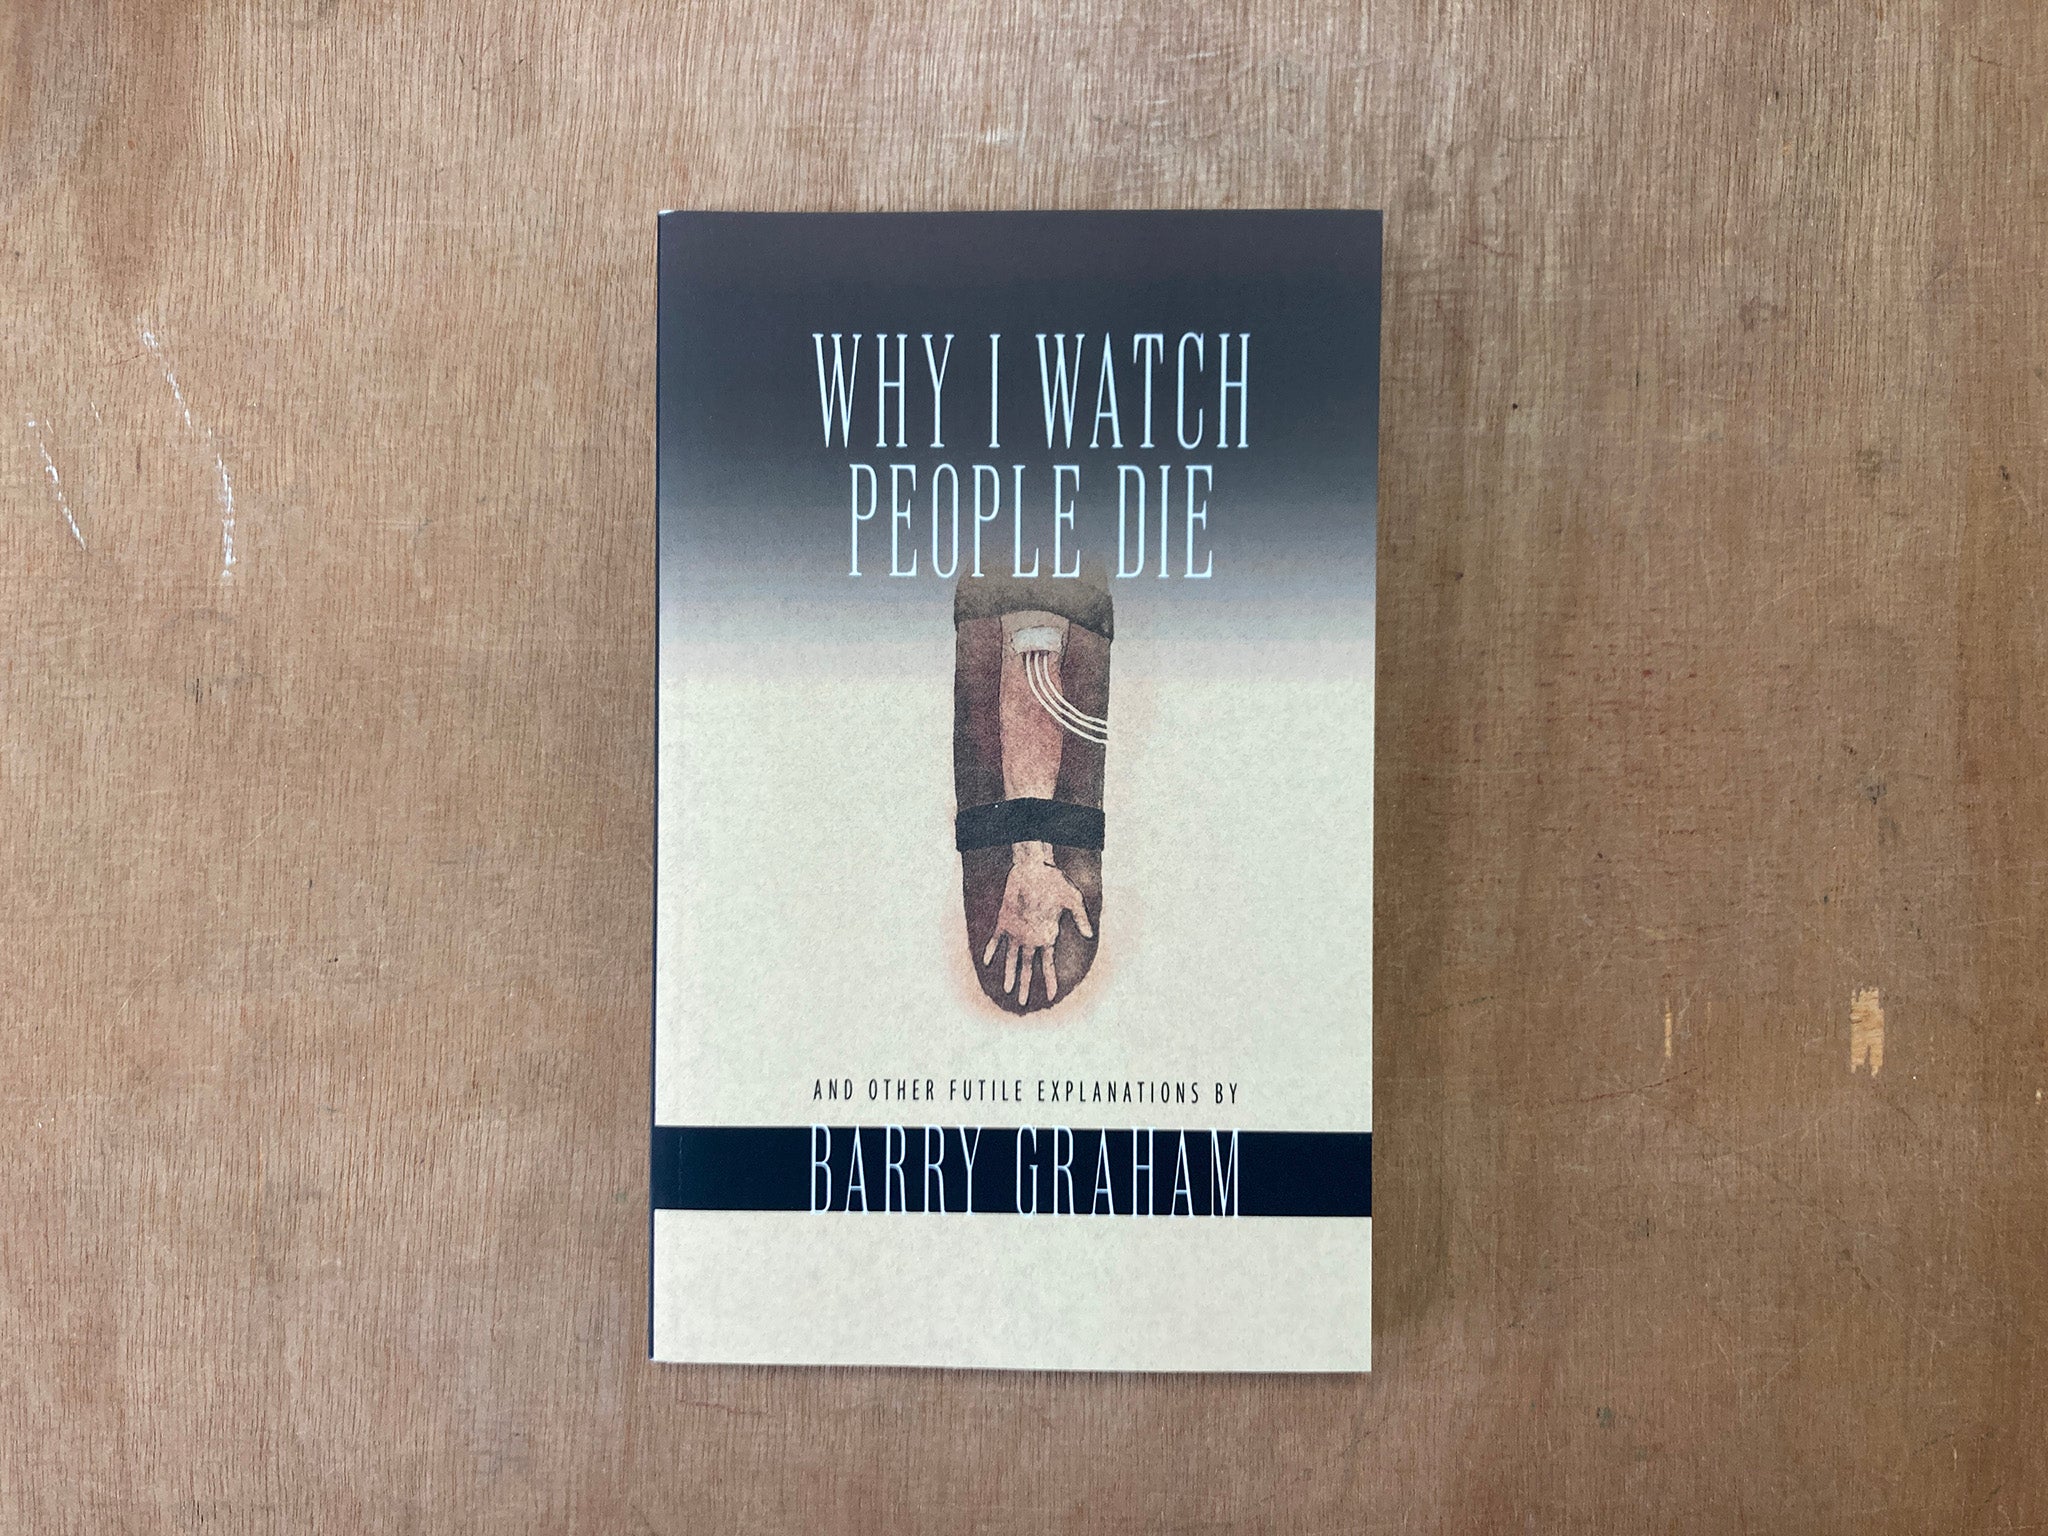 WHY I WATCH PEOPLE DIE (AND OTHER FUTILE EXPLANATIONS) by Barry Graham